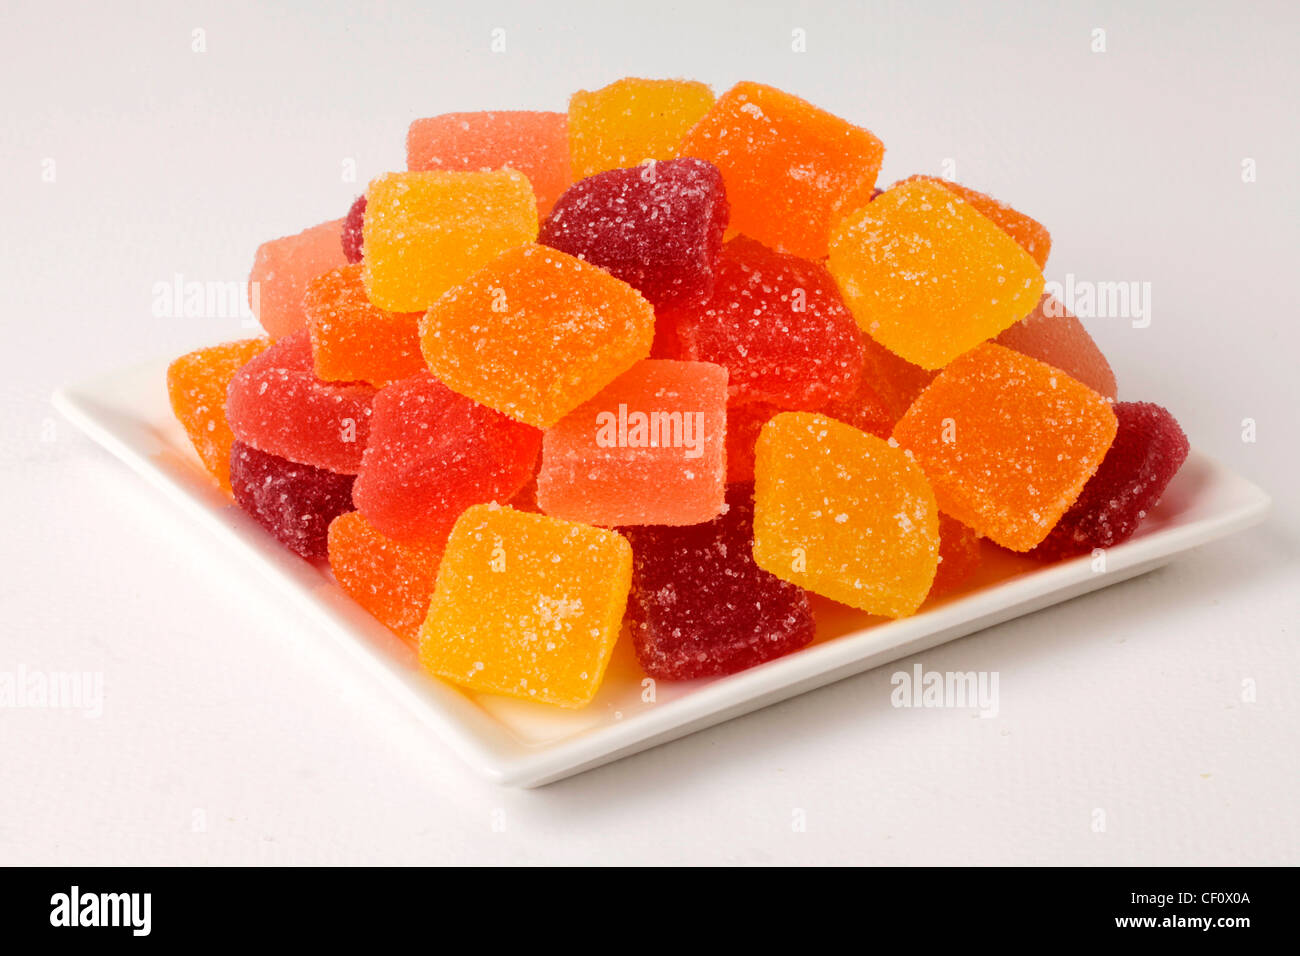 FRUIT Jelly Candy Banque D'Images